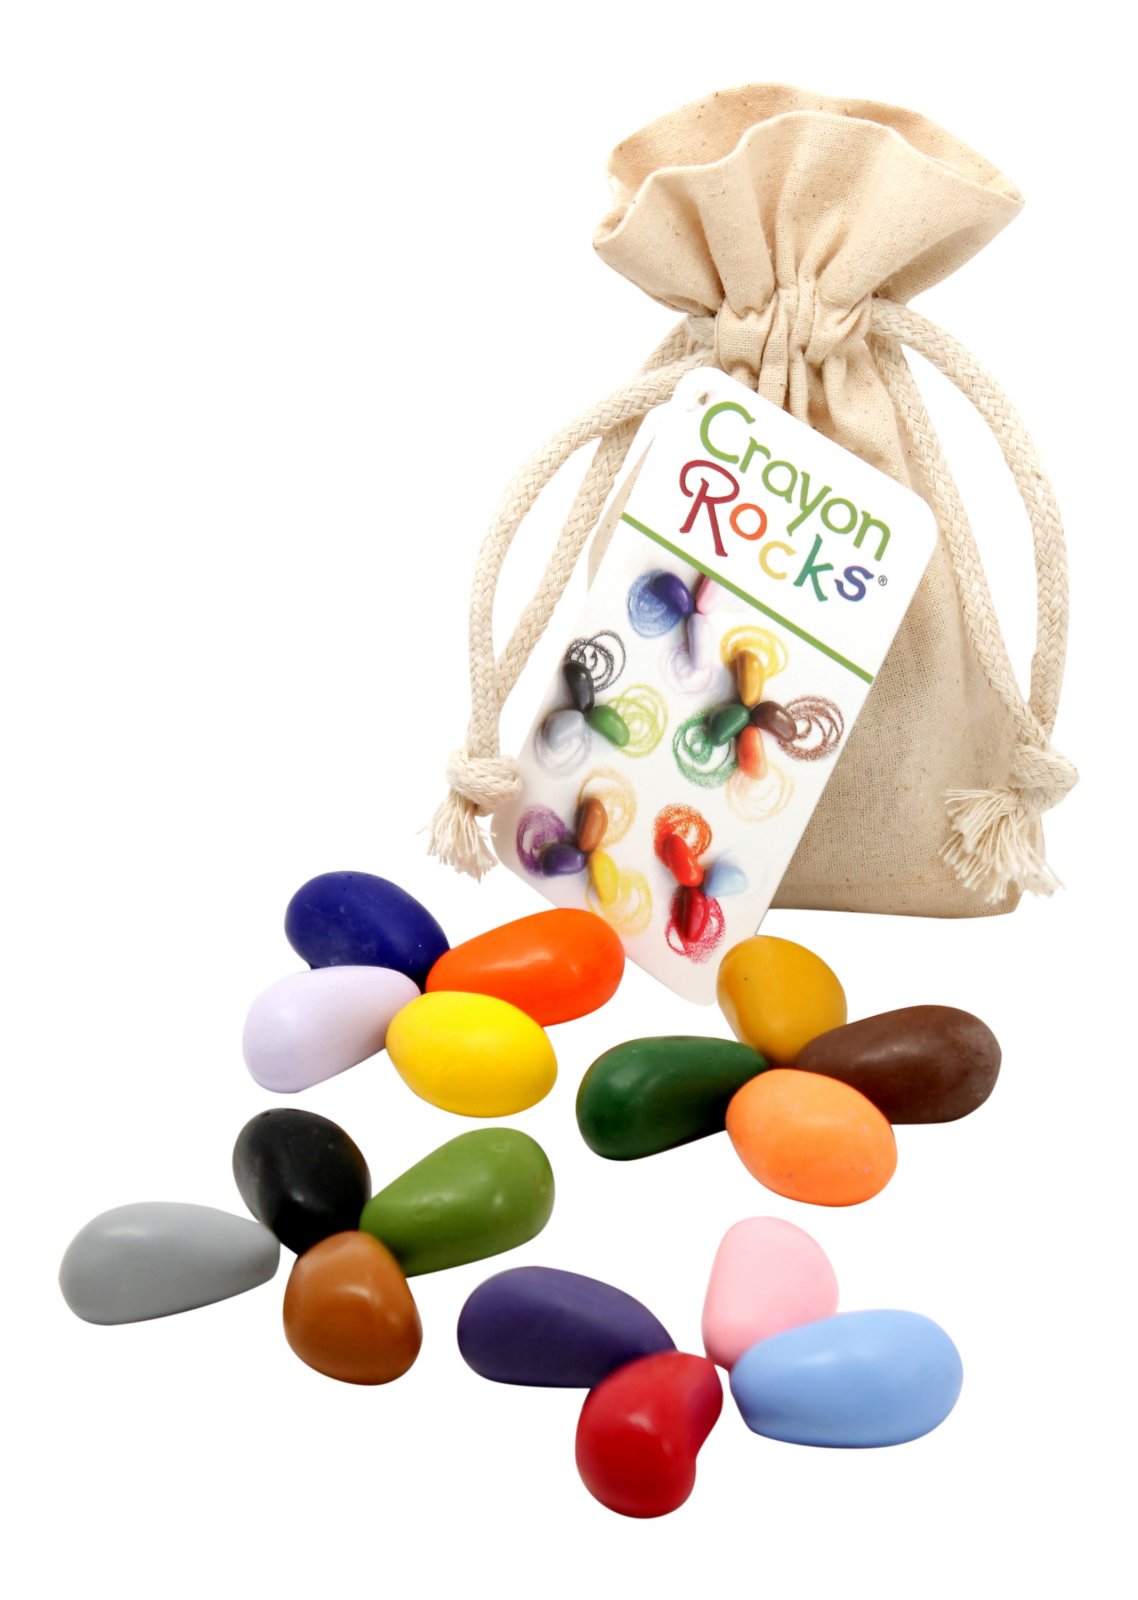 Crayon Rocks - Crunch Natural Parenting is where to buy